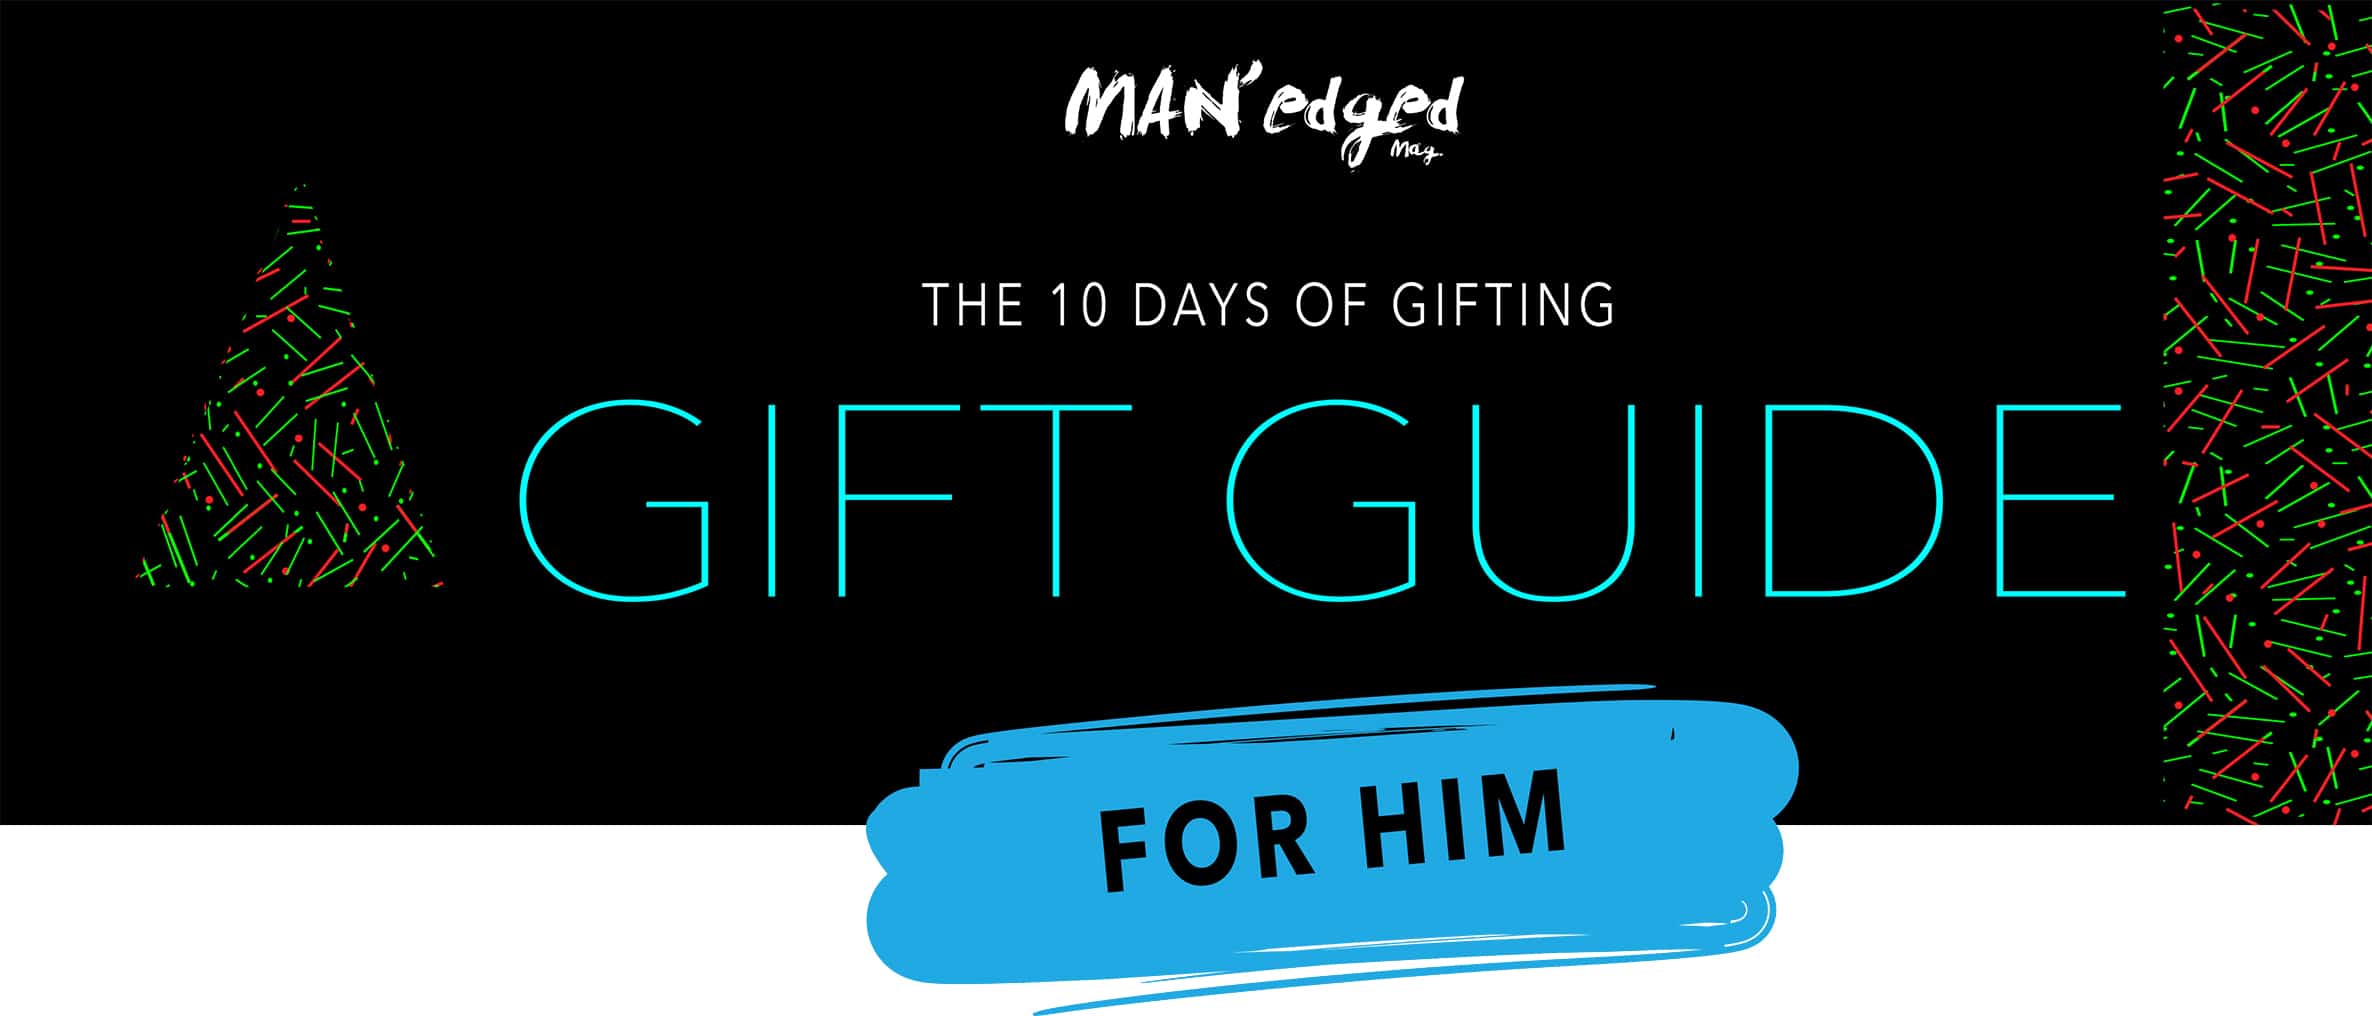 men's gift guide, control sector, button up shirt,men's gift guide, control sector, shirt, michael william g, editor's note, letter from editor, man'edged.com, man'edged.com magazine, manedged magazine, MAN'edged magazine, MAN'edged mag, menswear, nyc, new york city, men's fashion, men's style, style, men's look, camel wool coats, camel, wool, coat, this or that, holiday, holiday gift, holiday gift guide, gift, gifting, mens gift guide, guide, gift guide, holiday gift guide